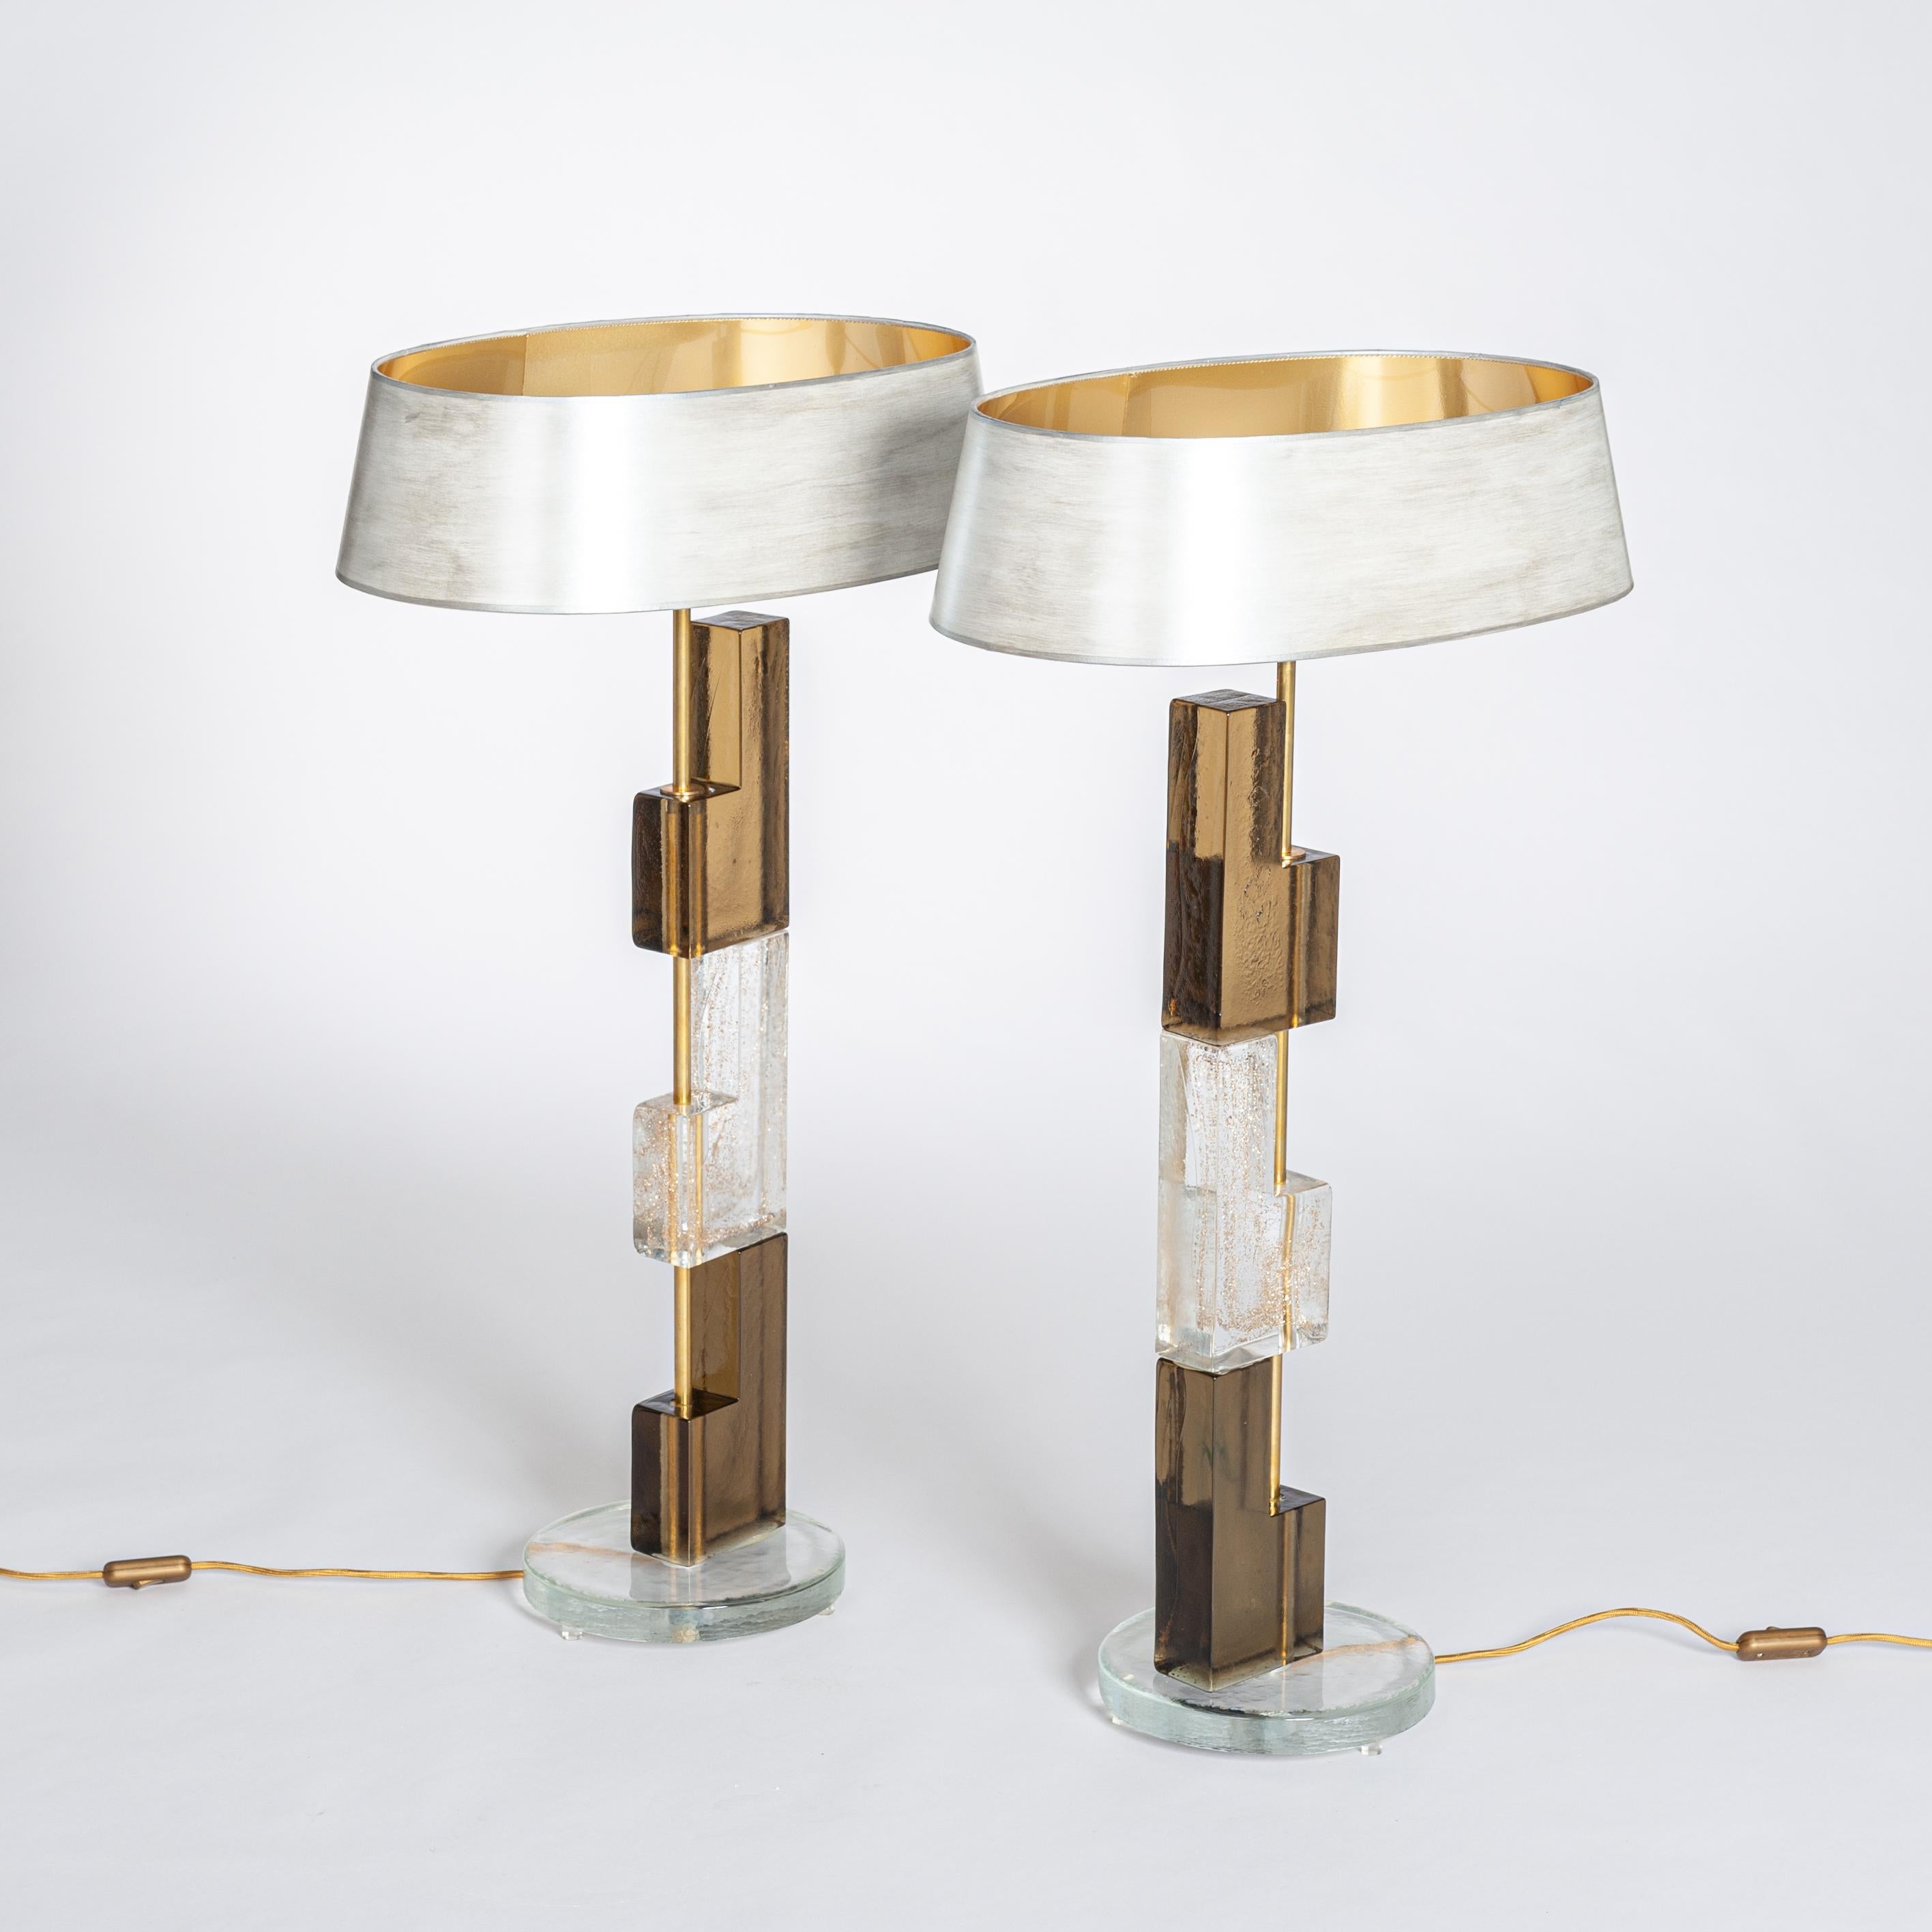 Pair of Murano glass table lamps made of rectangular elements in clear and amber-bronze-brown glass on a round base. 
The surface of the glass elements is slightly textured. The transparent element has gold particles in the glass mass.
Oval shades